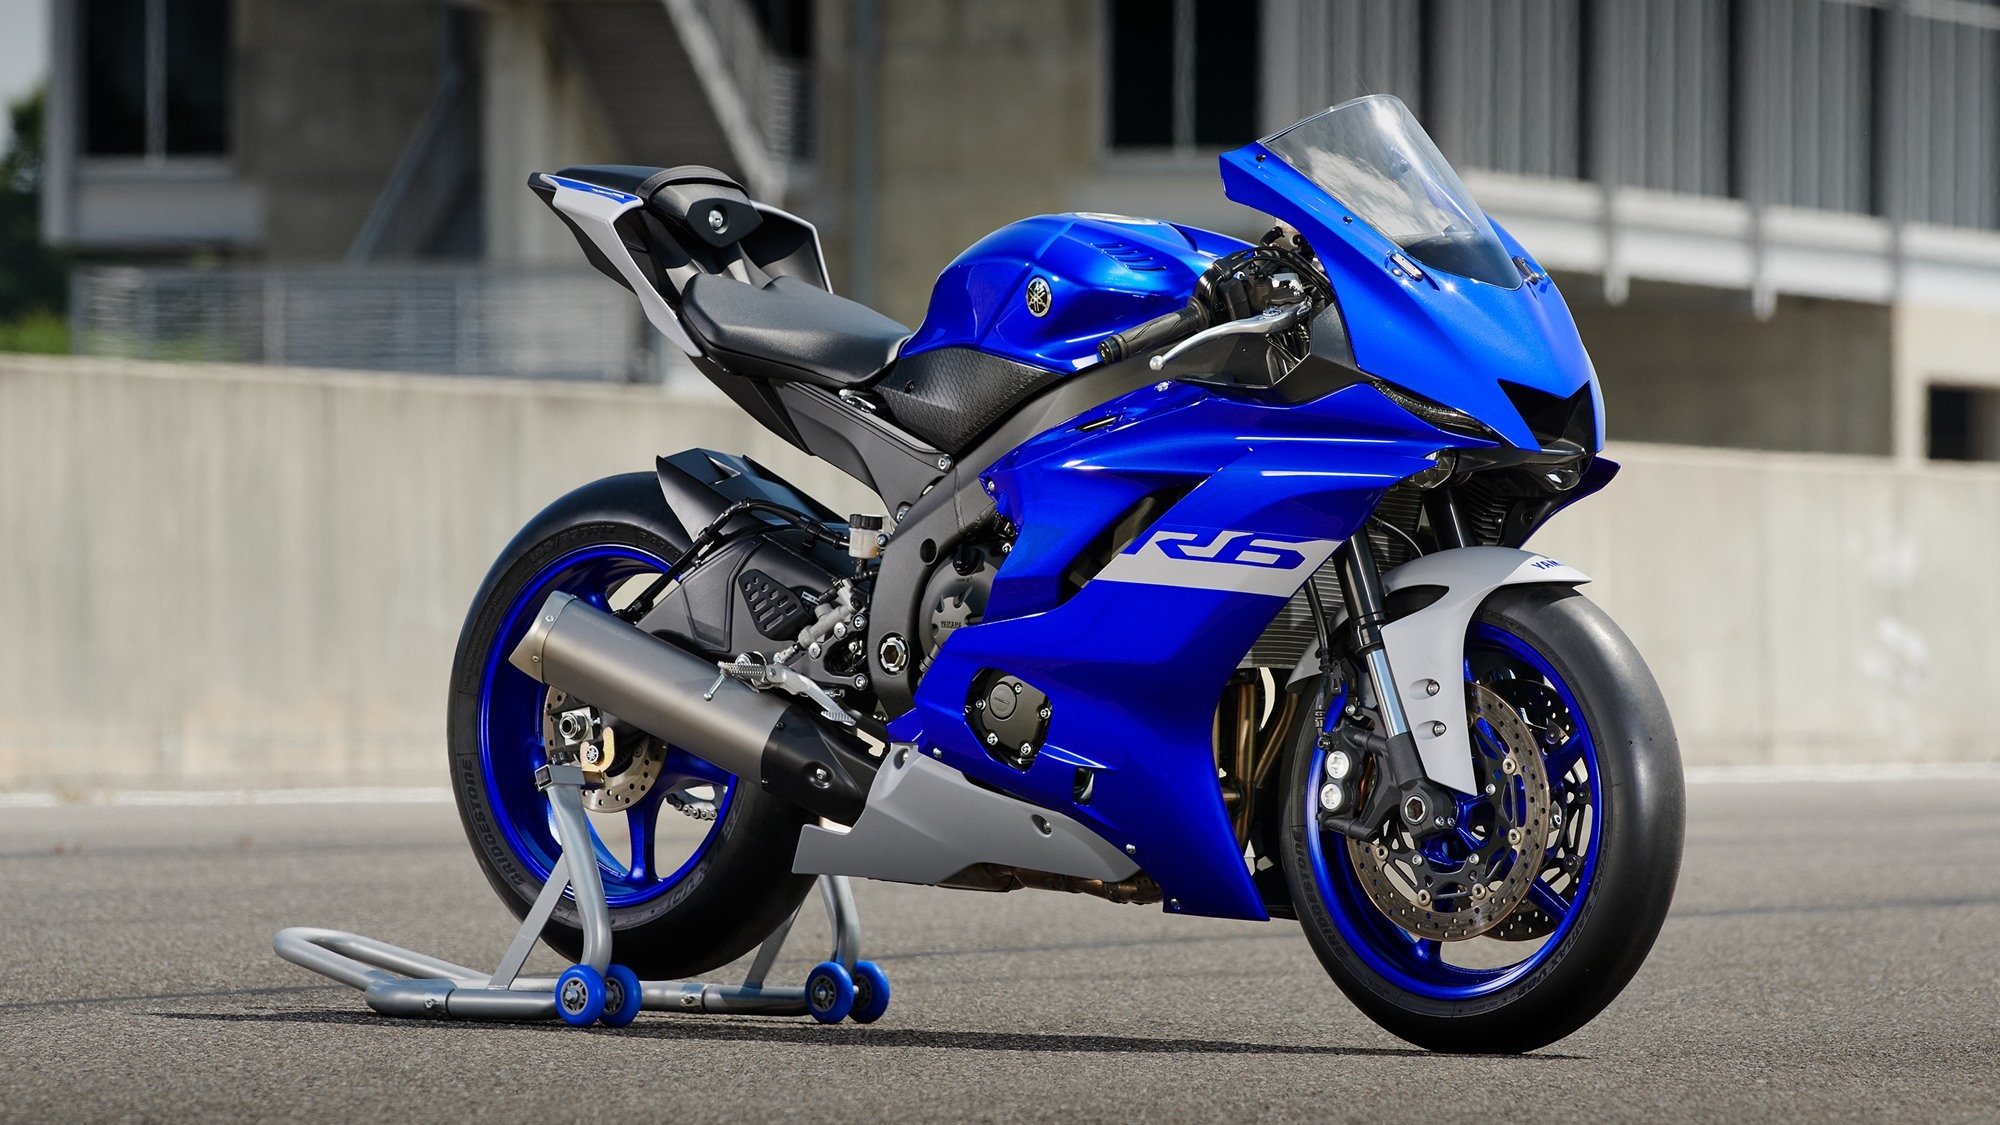 HD wallpaper, Yamaha Yzf R6 To Be Discontinued, Sold From January 2021, 2000X1130 Hd Desktop, Auto, Yamaha R6 Race Variant, Desktop Hd Yamaha Yzf R6 Background